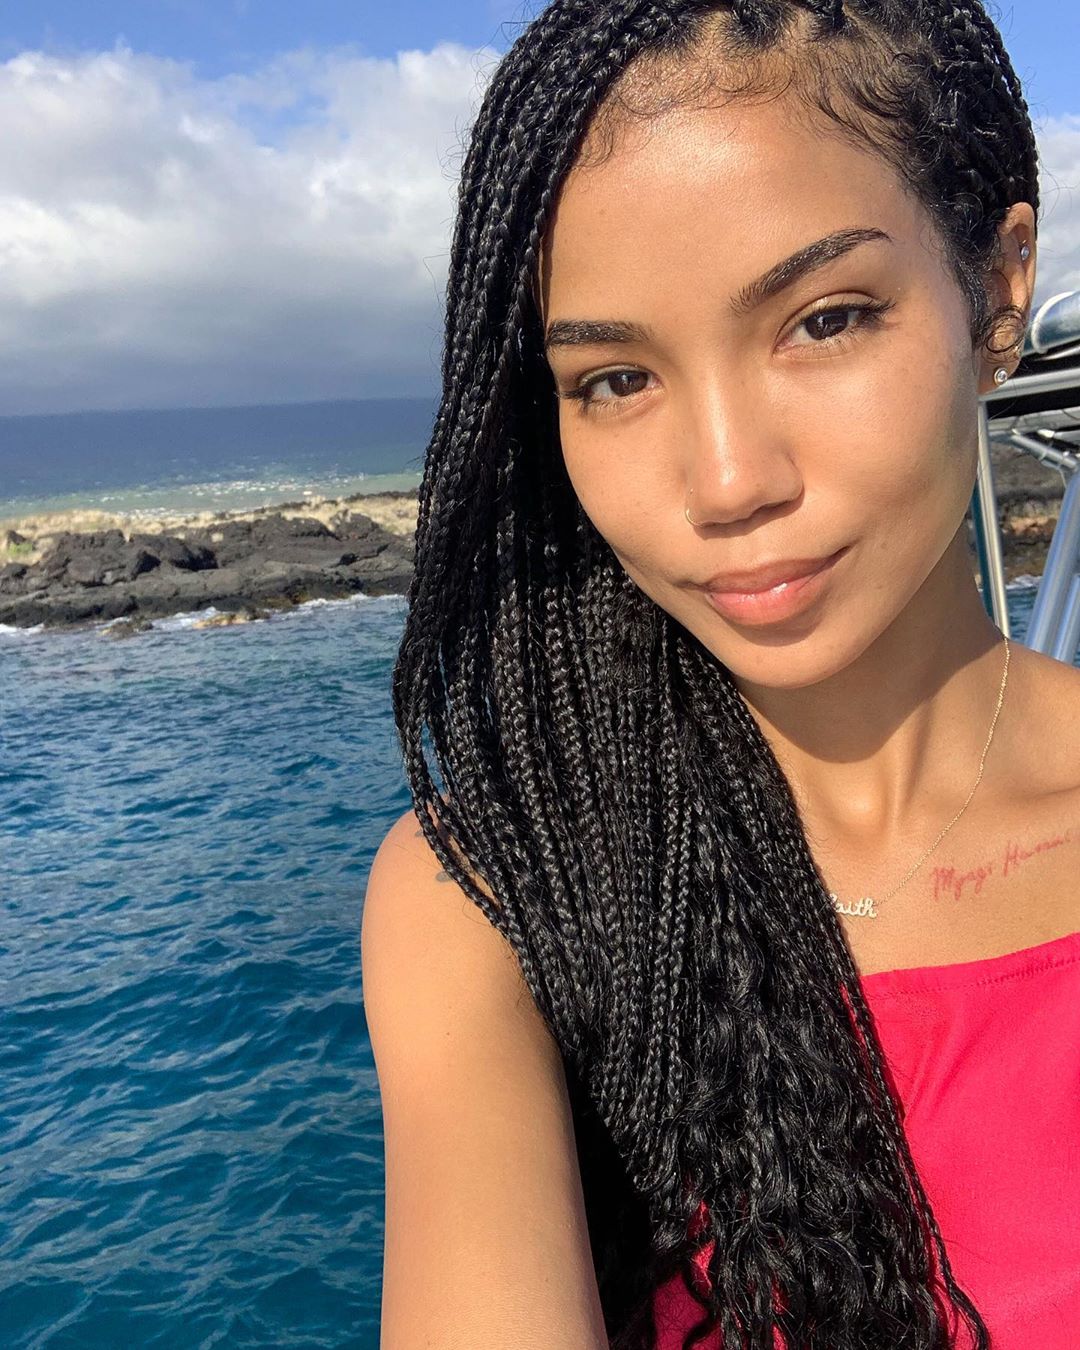 Jhené Aiko Credits This Completely Free Thing With Glowing Skin (And It's Not Water)